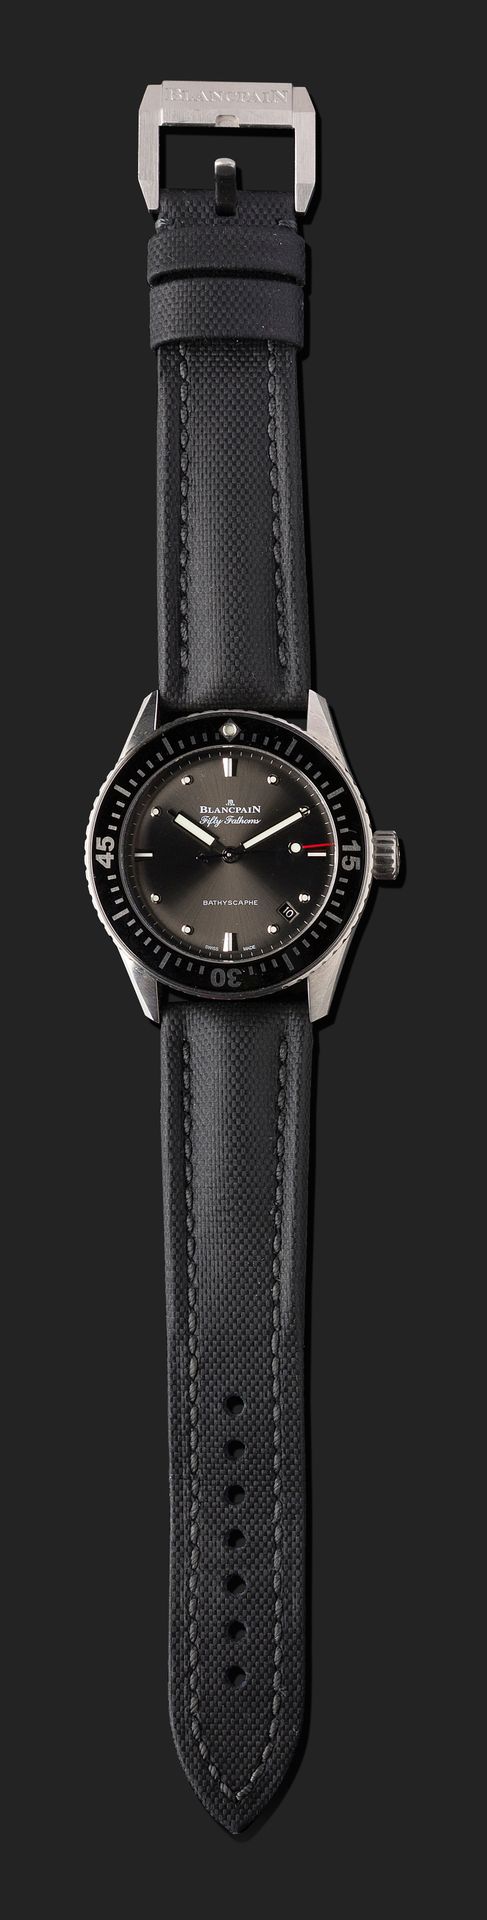 Null BLANCPAIN
Fifty Fathom Bathyscaphe, number 459.
Beautiful diving wristwatch&hellip;